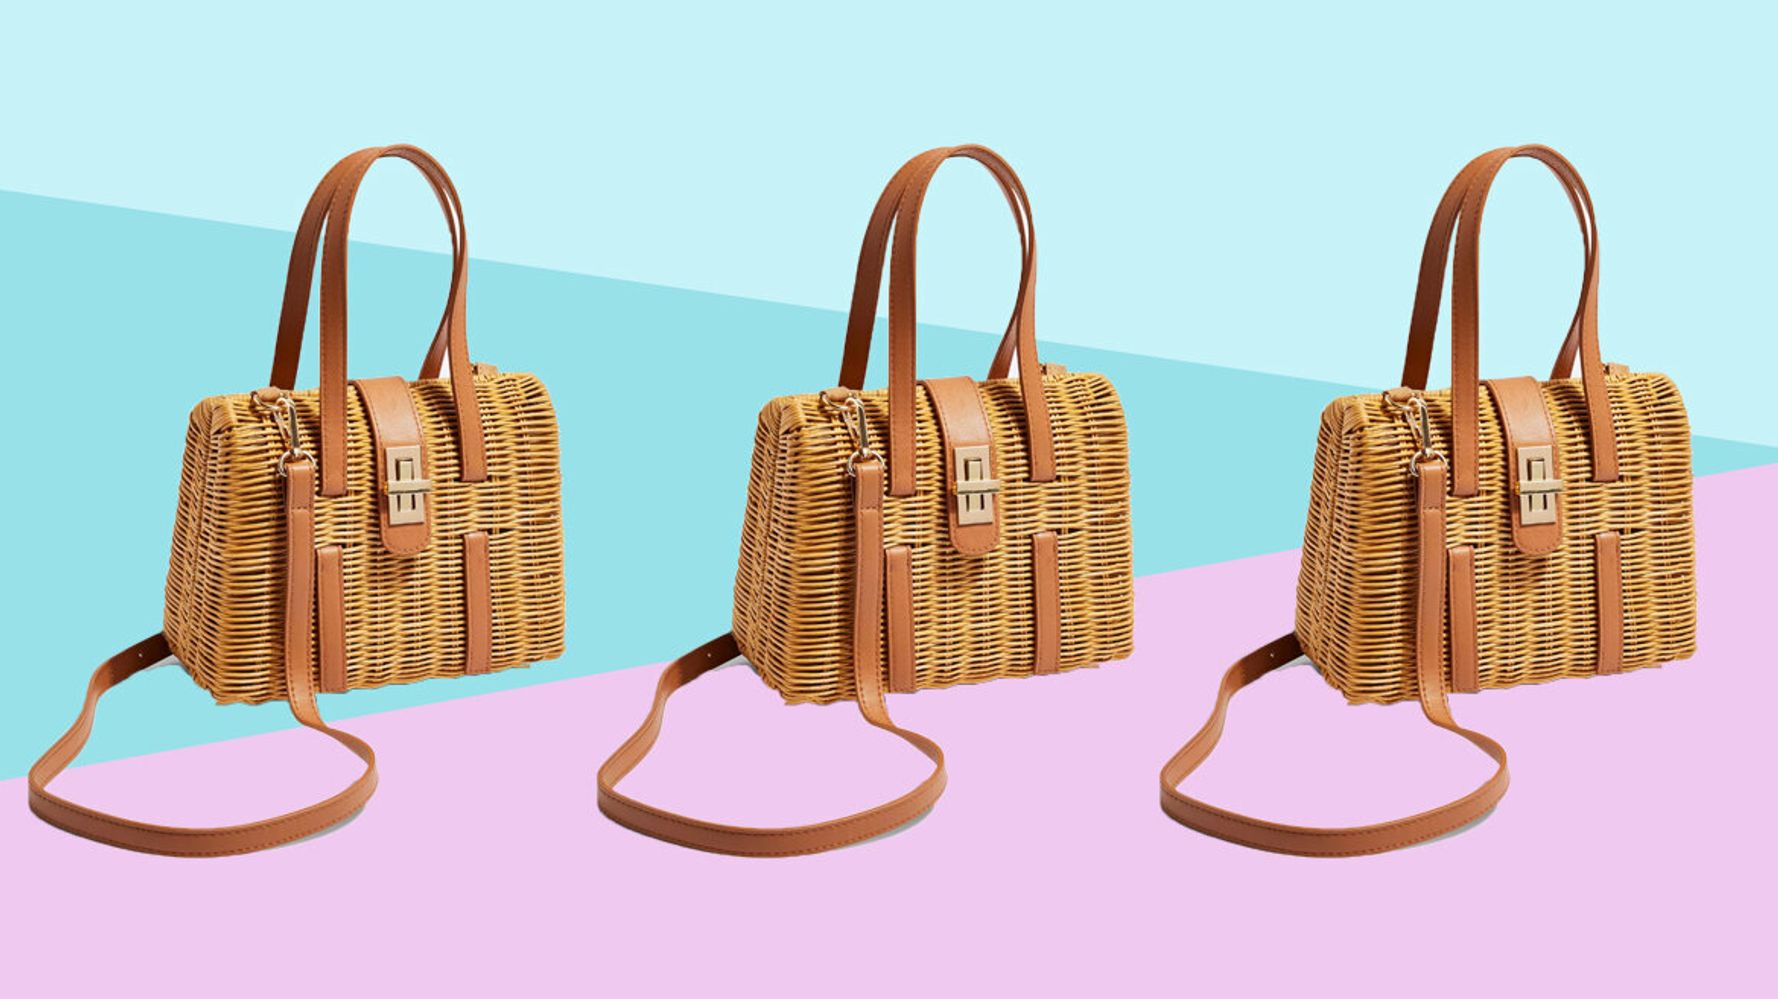 A Straw Bag For Summer 2020—12 Straw Bags For The SummerHelloGiggles